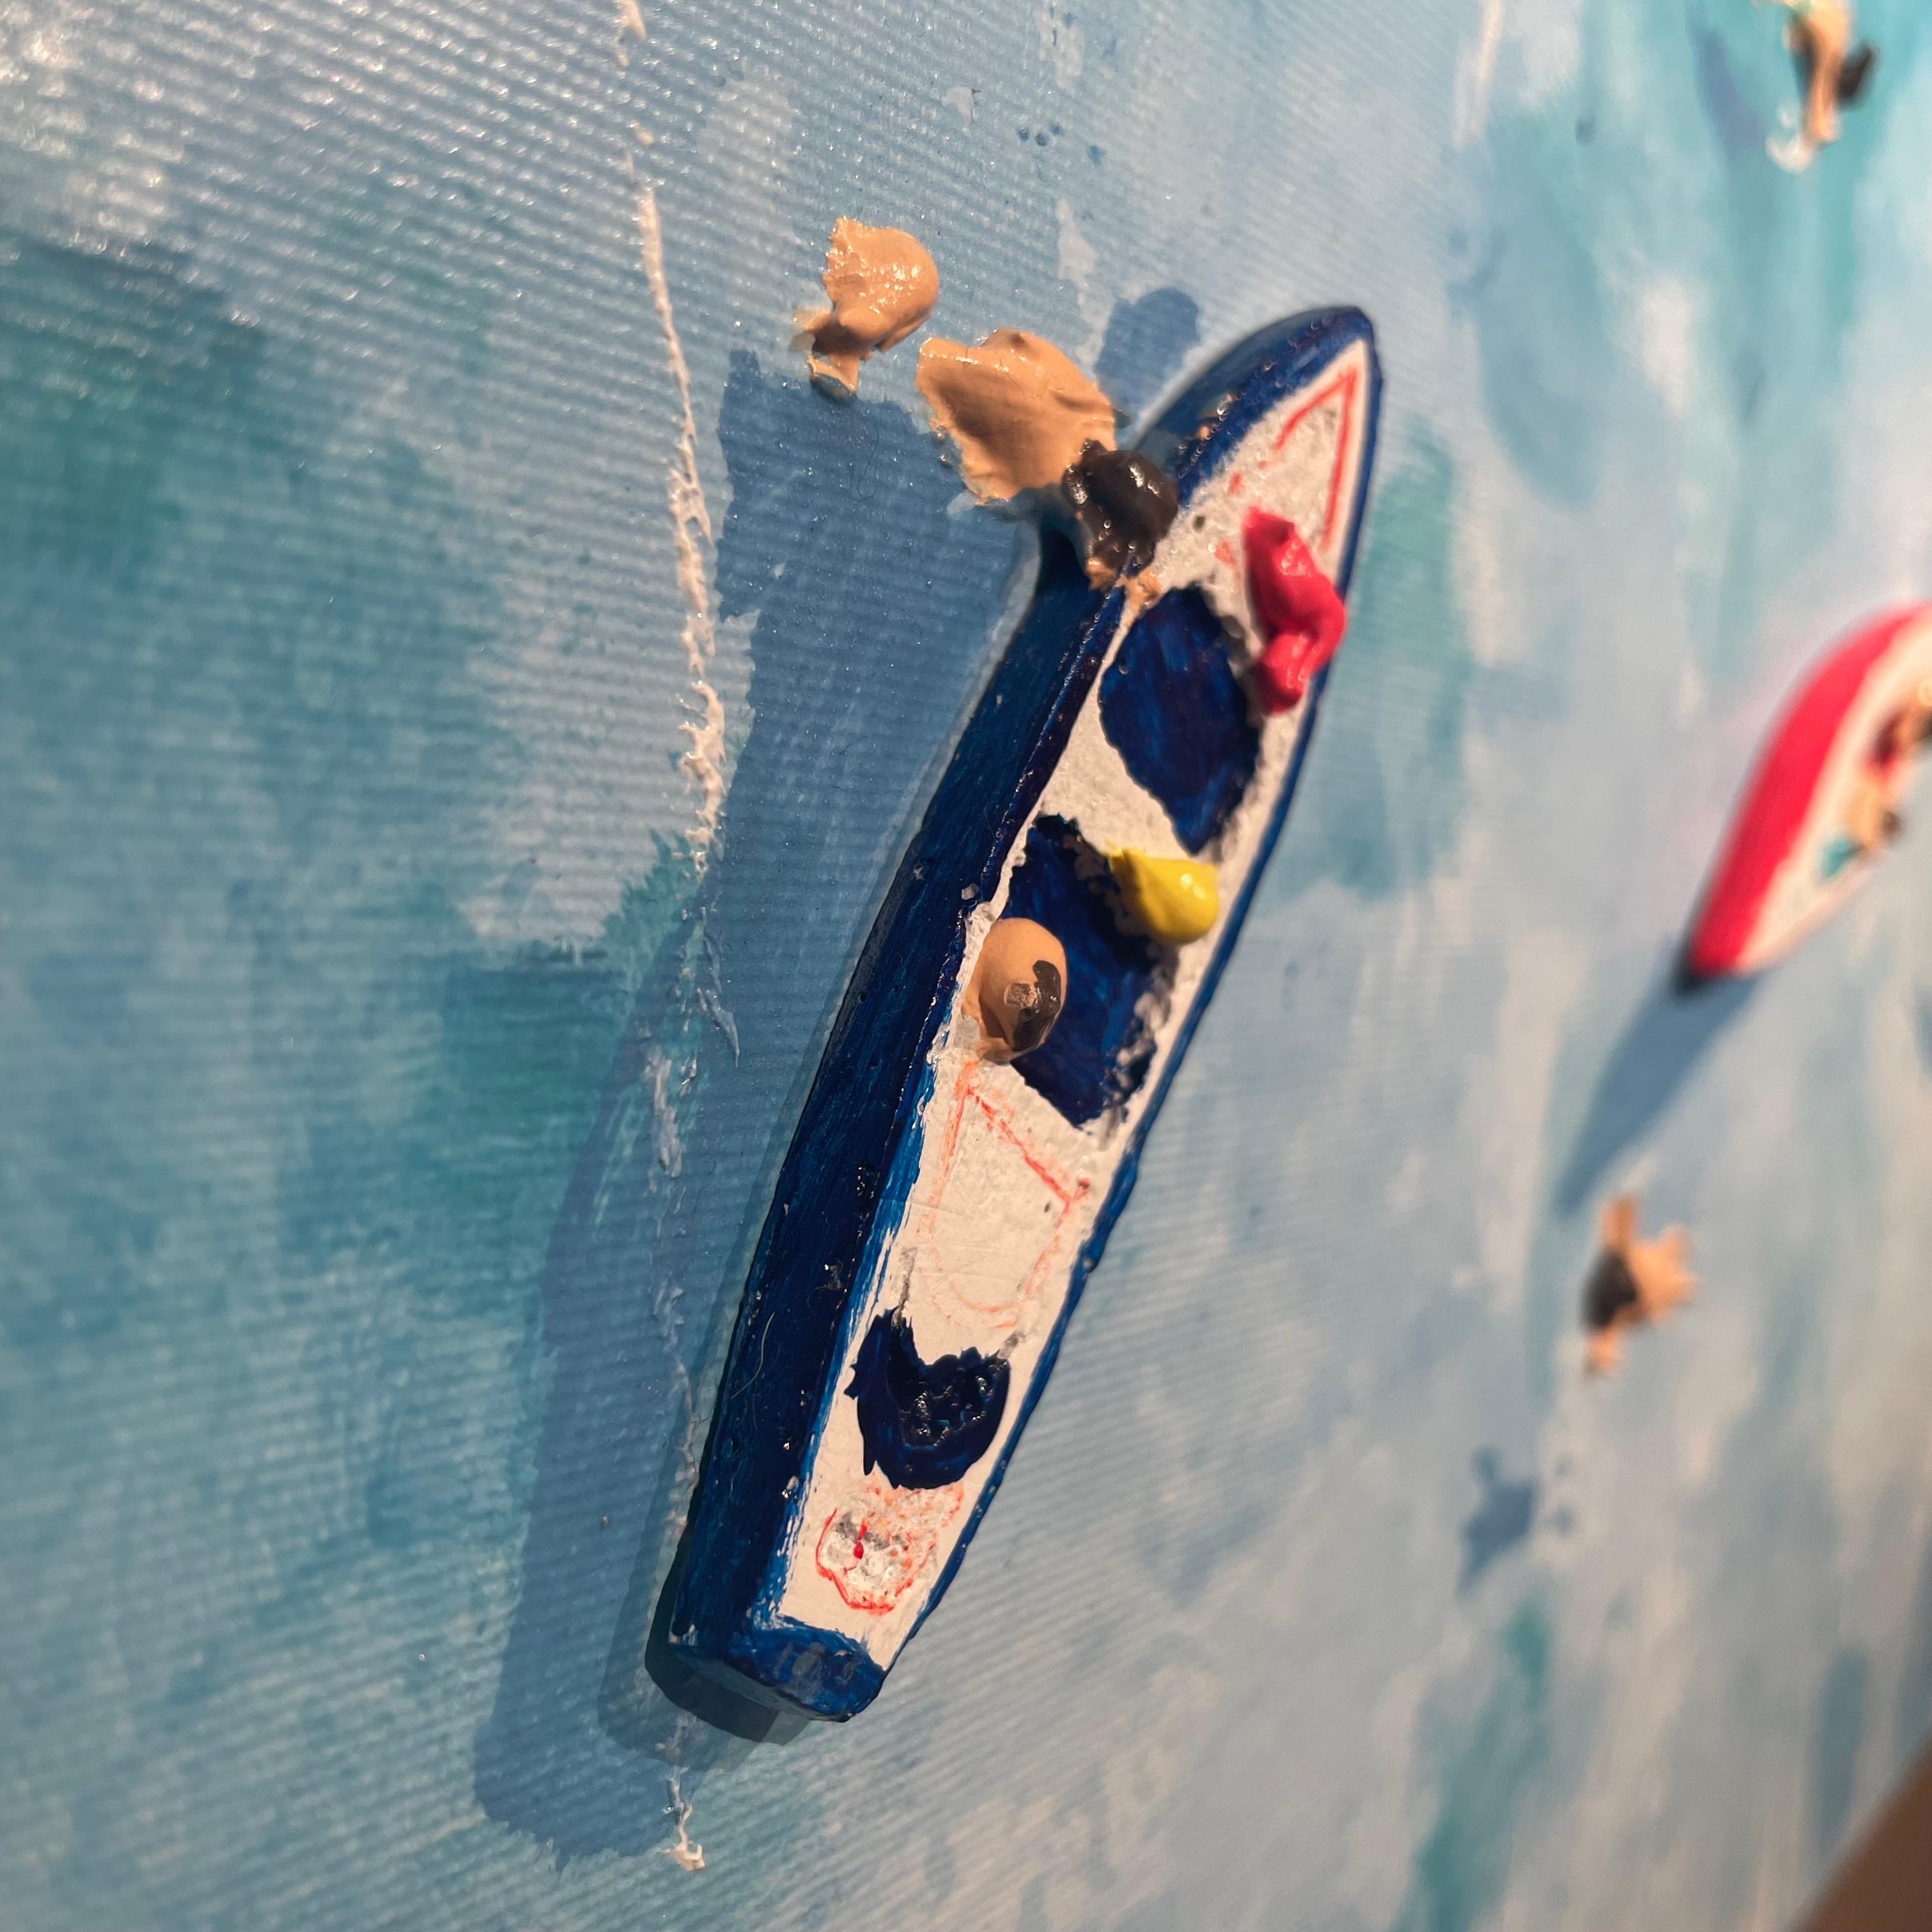 'Boating Around' is a fun and vibrant contemporary 3D painting of boats in the water energetically creating a fun and dynamic work.  Todd has created a work that is vibrant, colourful and bold!

Max Todd uses contemporary techniques to produce his